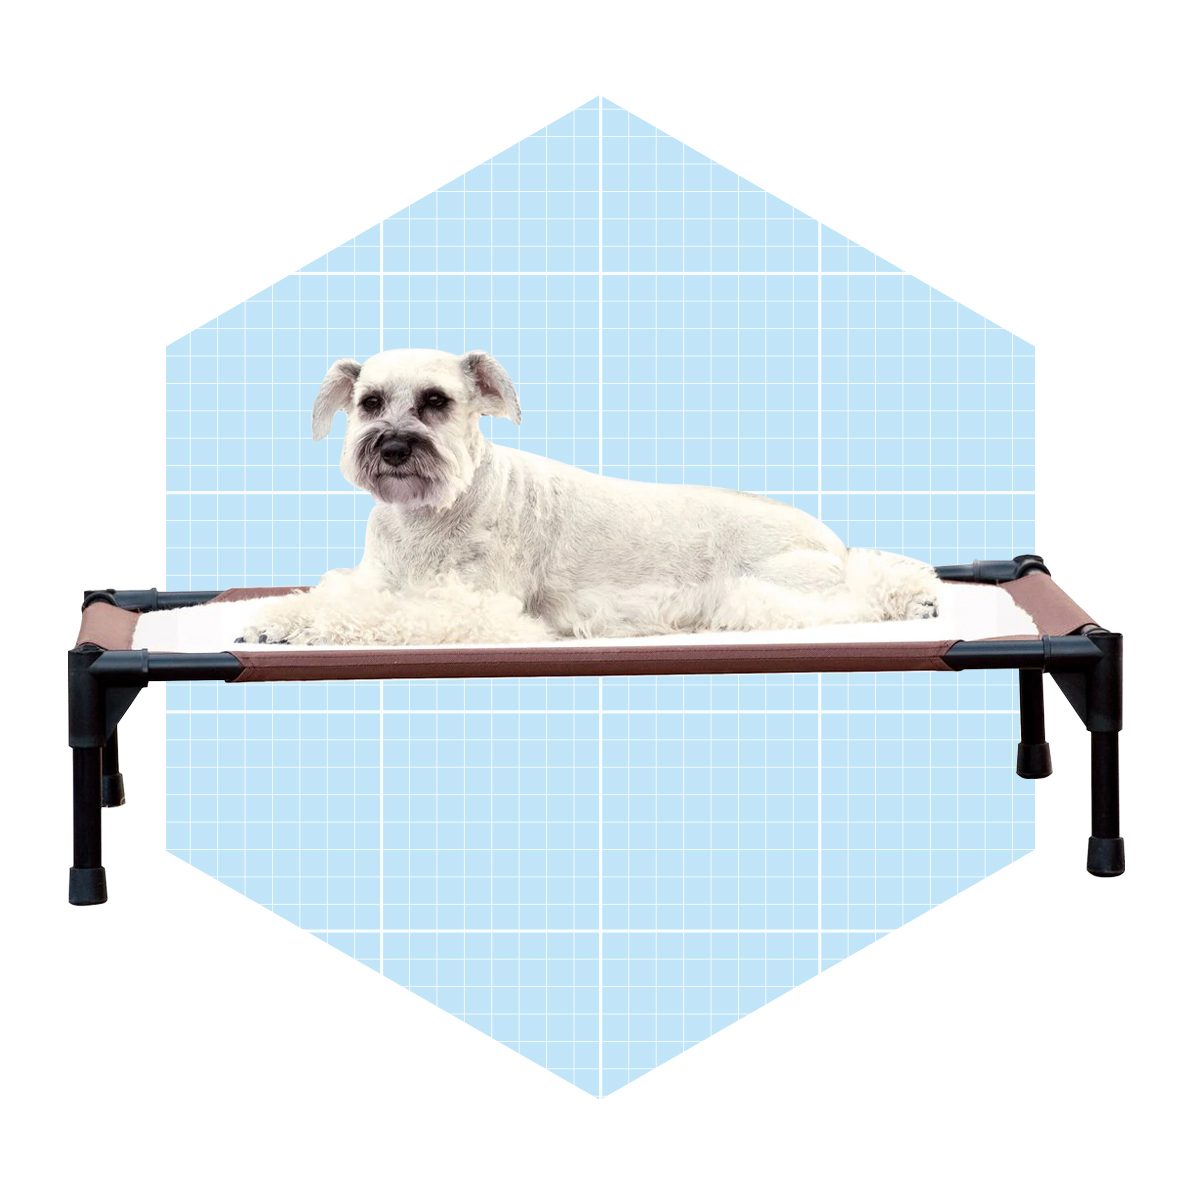 K&h Pet Products Self Warming Elevated Dog Bed Ecomm Chewy.com